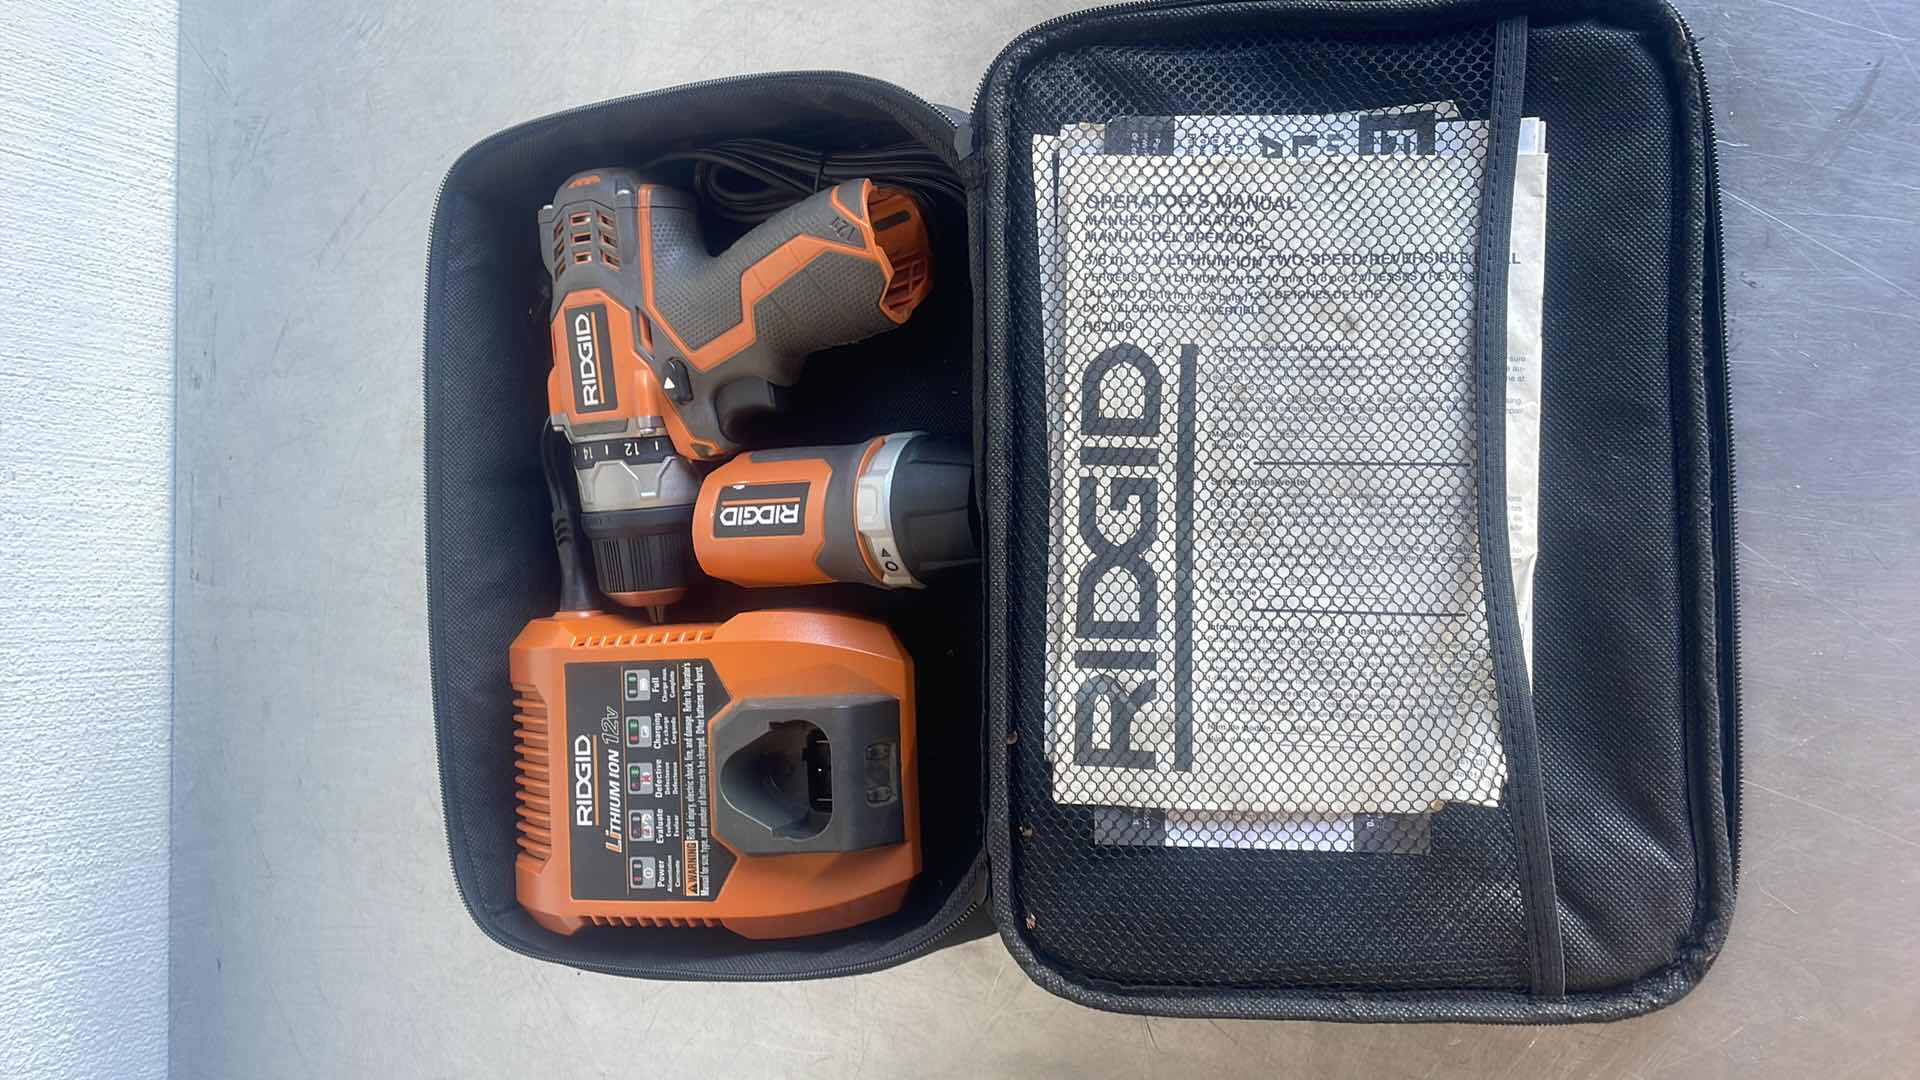 Photo 1 of RIDGID 12V WORKLIGHT R82920 & 3/8” 12V DRILL R82009 WITH CHARGER IN SOFT CASE NO BATTERY UNTESTED